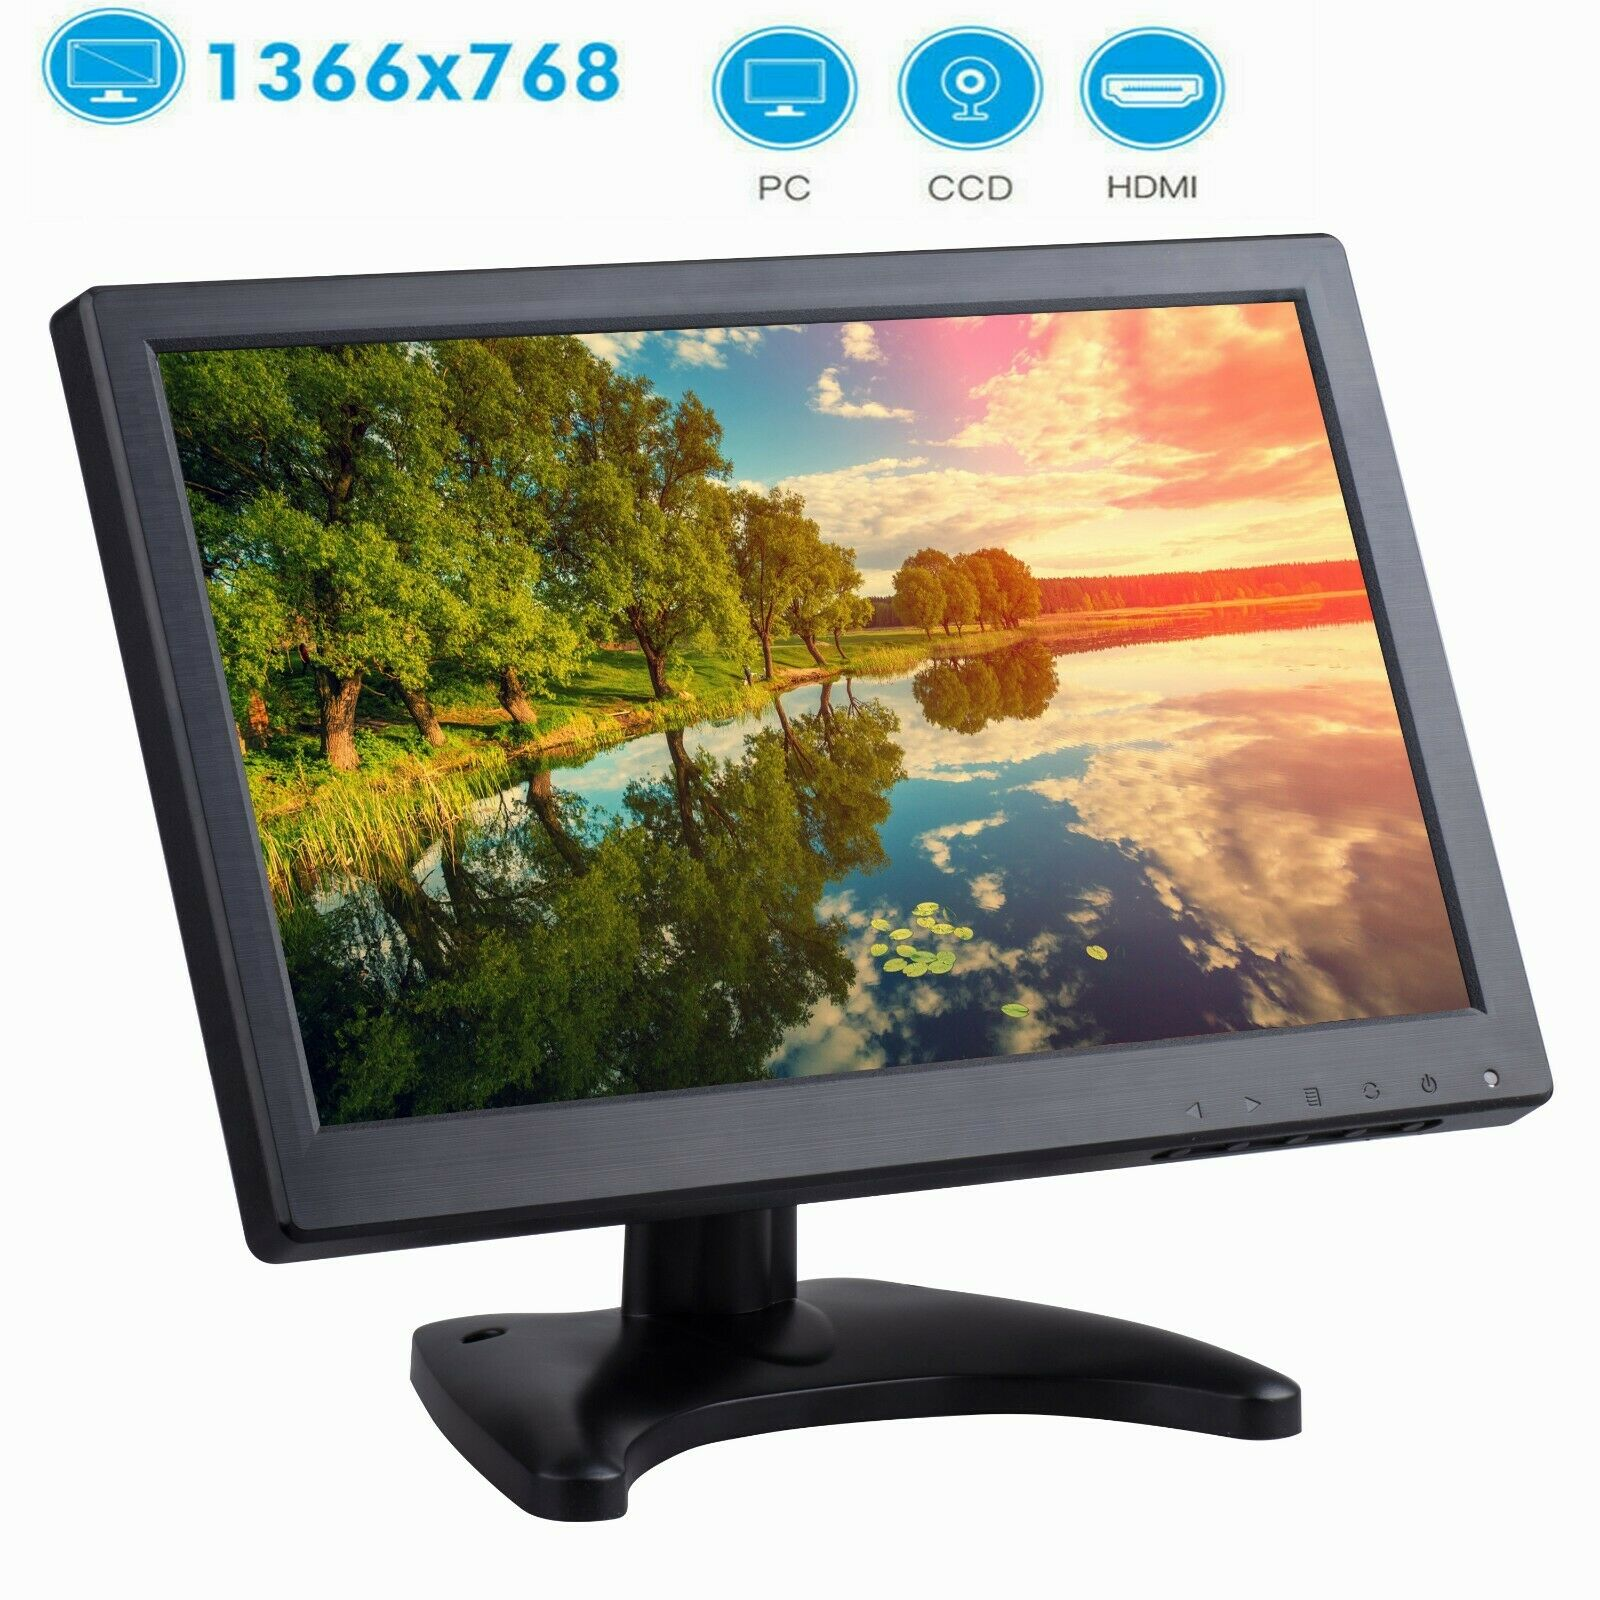 Best options for a small secondary monitor? - TechPowerUp Forums